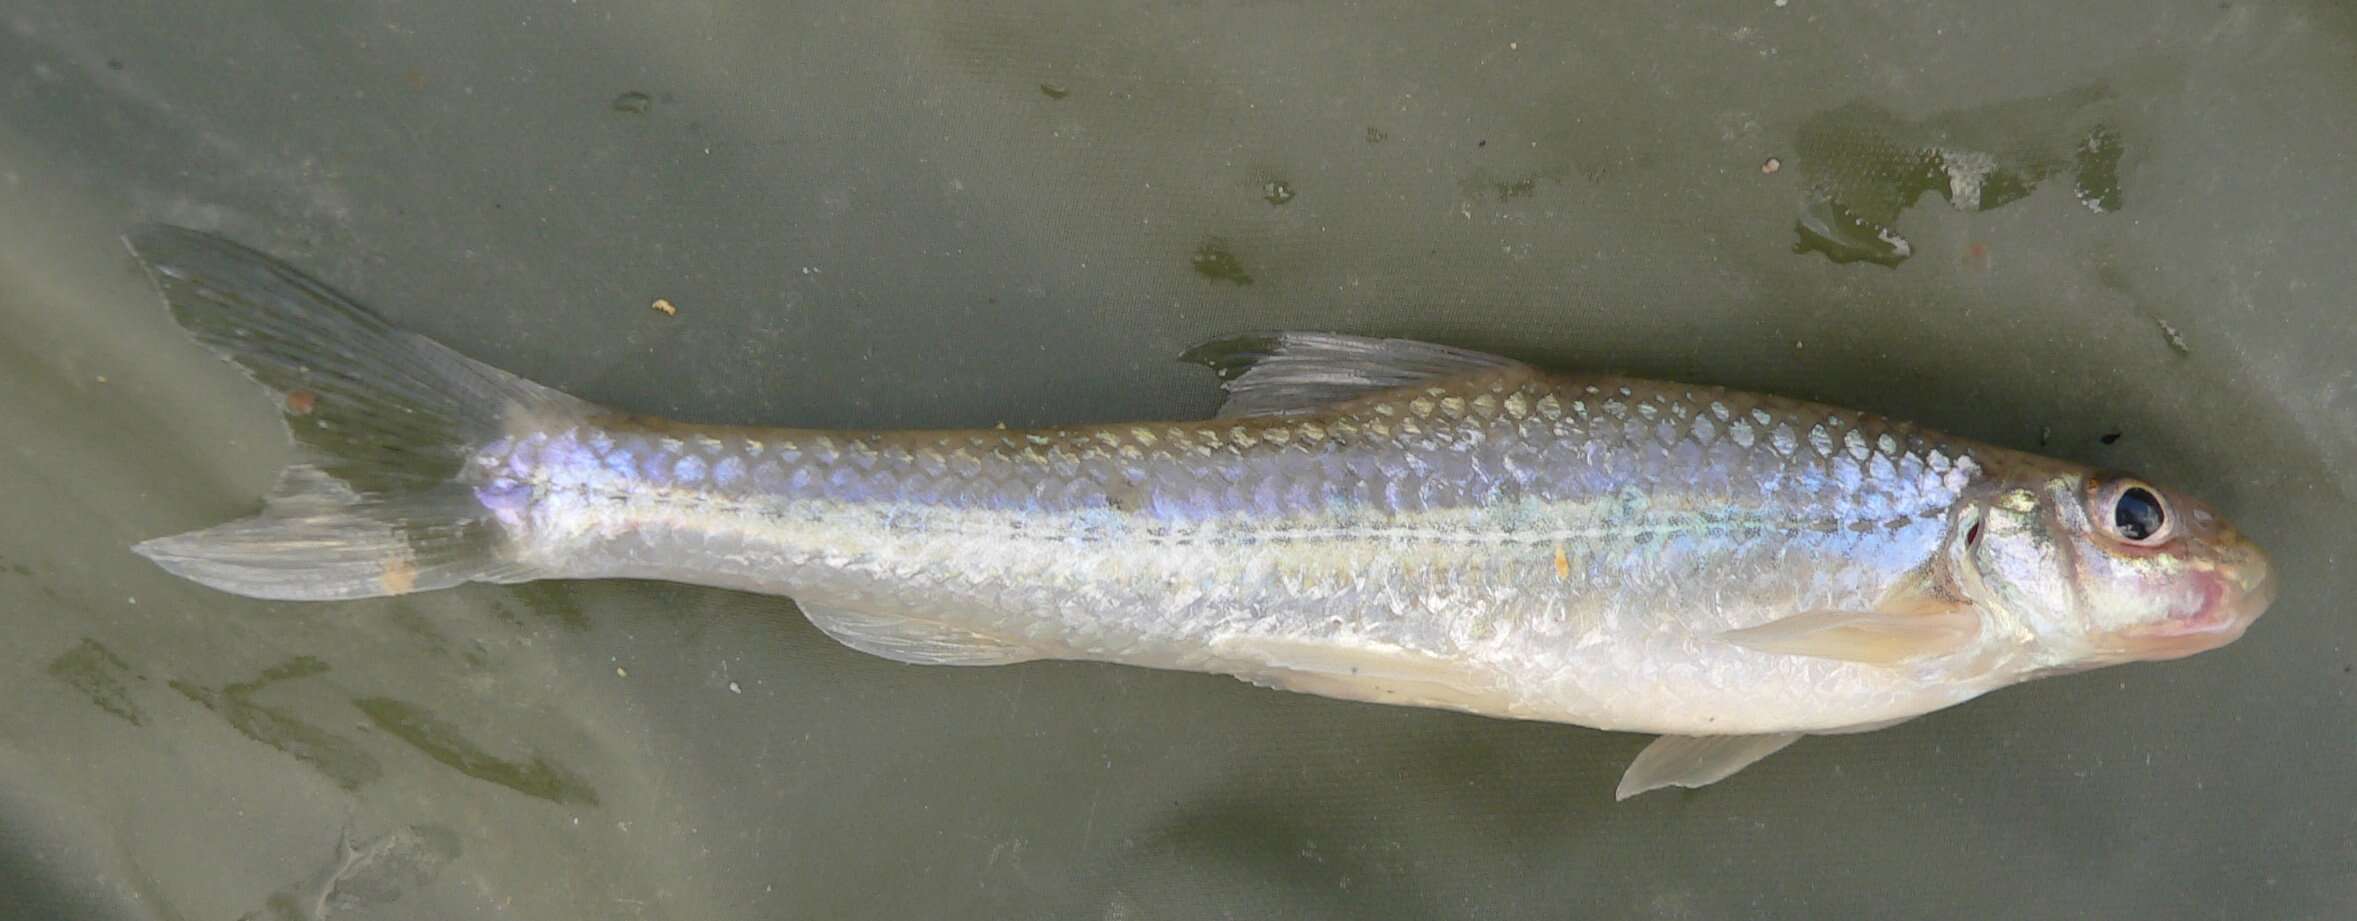 Image of Northern whitefin gudgeon